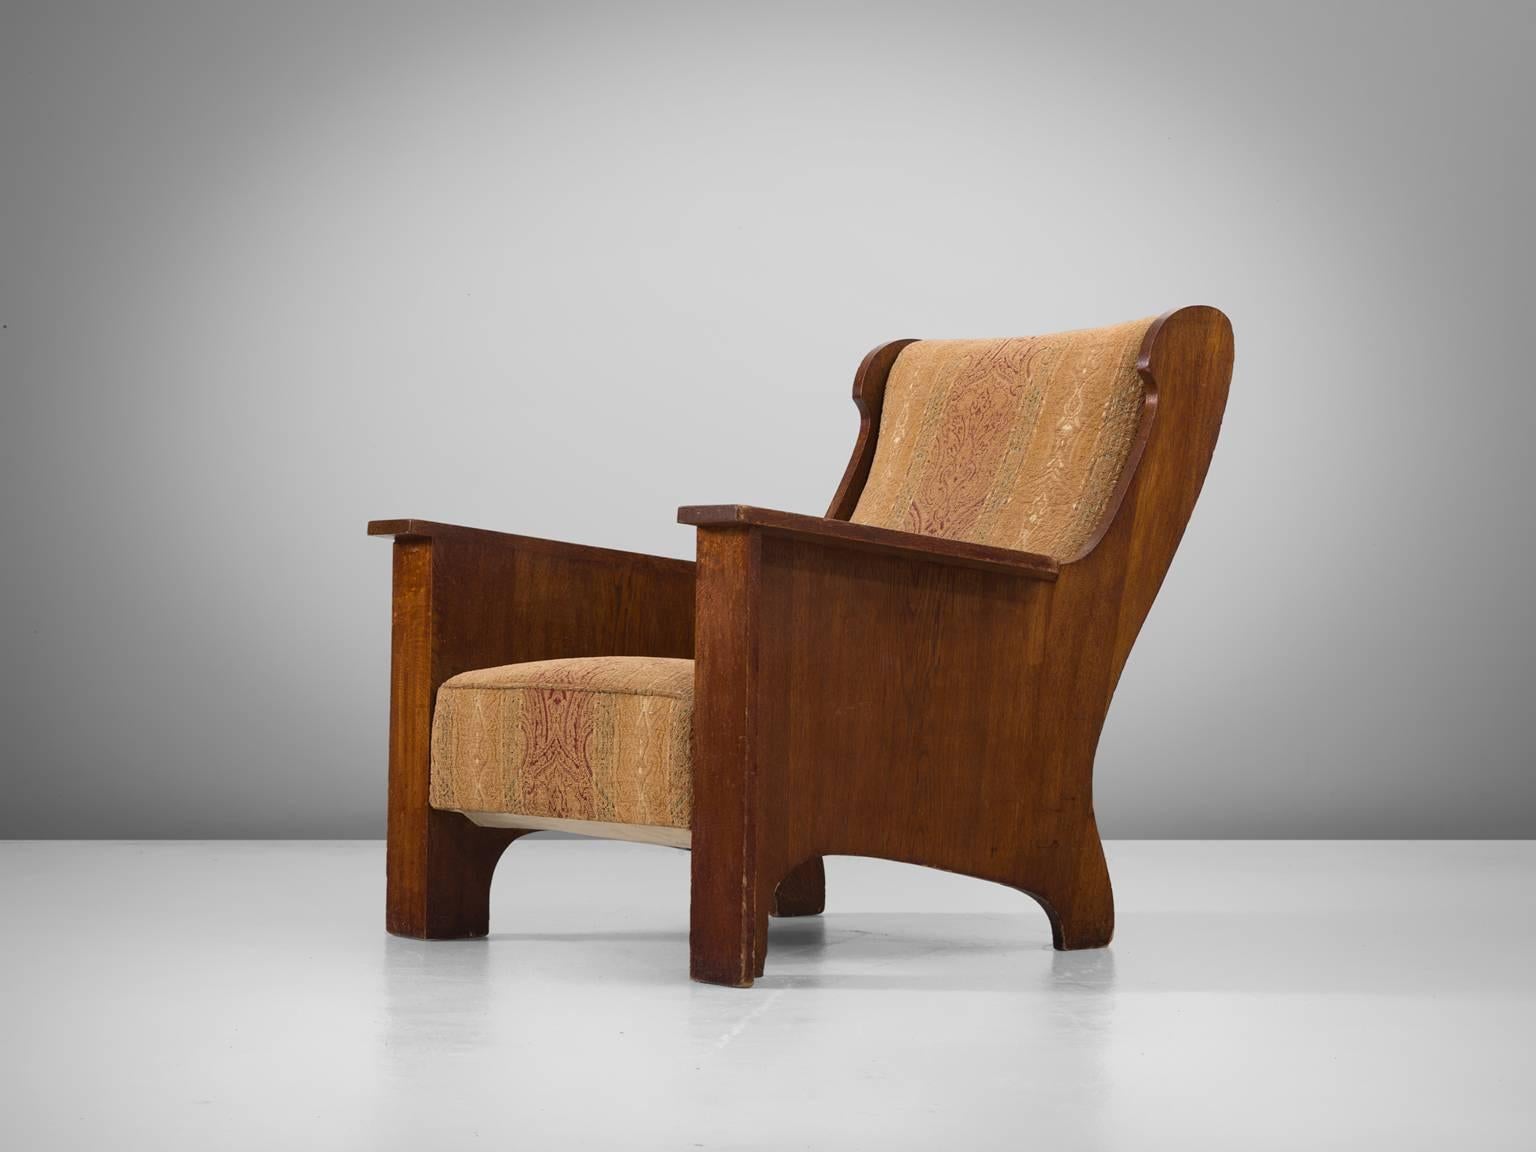 Armchair, in oak and fabric, Sweden 1930s. 

Extraordinary and wide Art Deco lounge chair with a nicely patinated oak wooden frame. This chair shows some interesting lines. The back is nicely curved with elegant lines. The front has a more sturdy